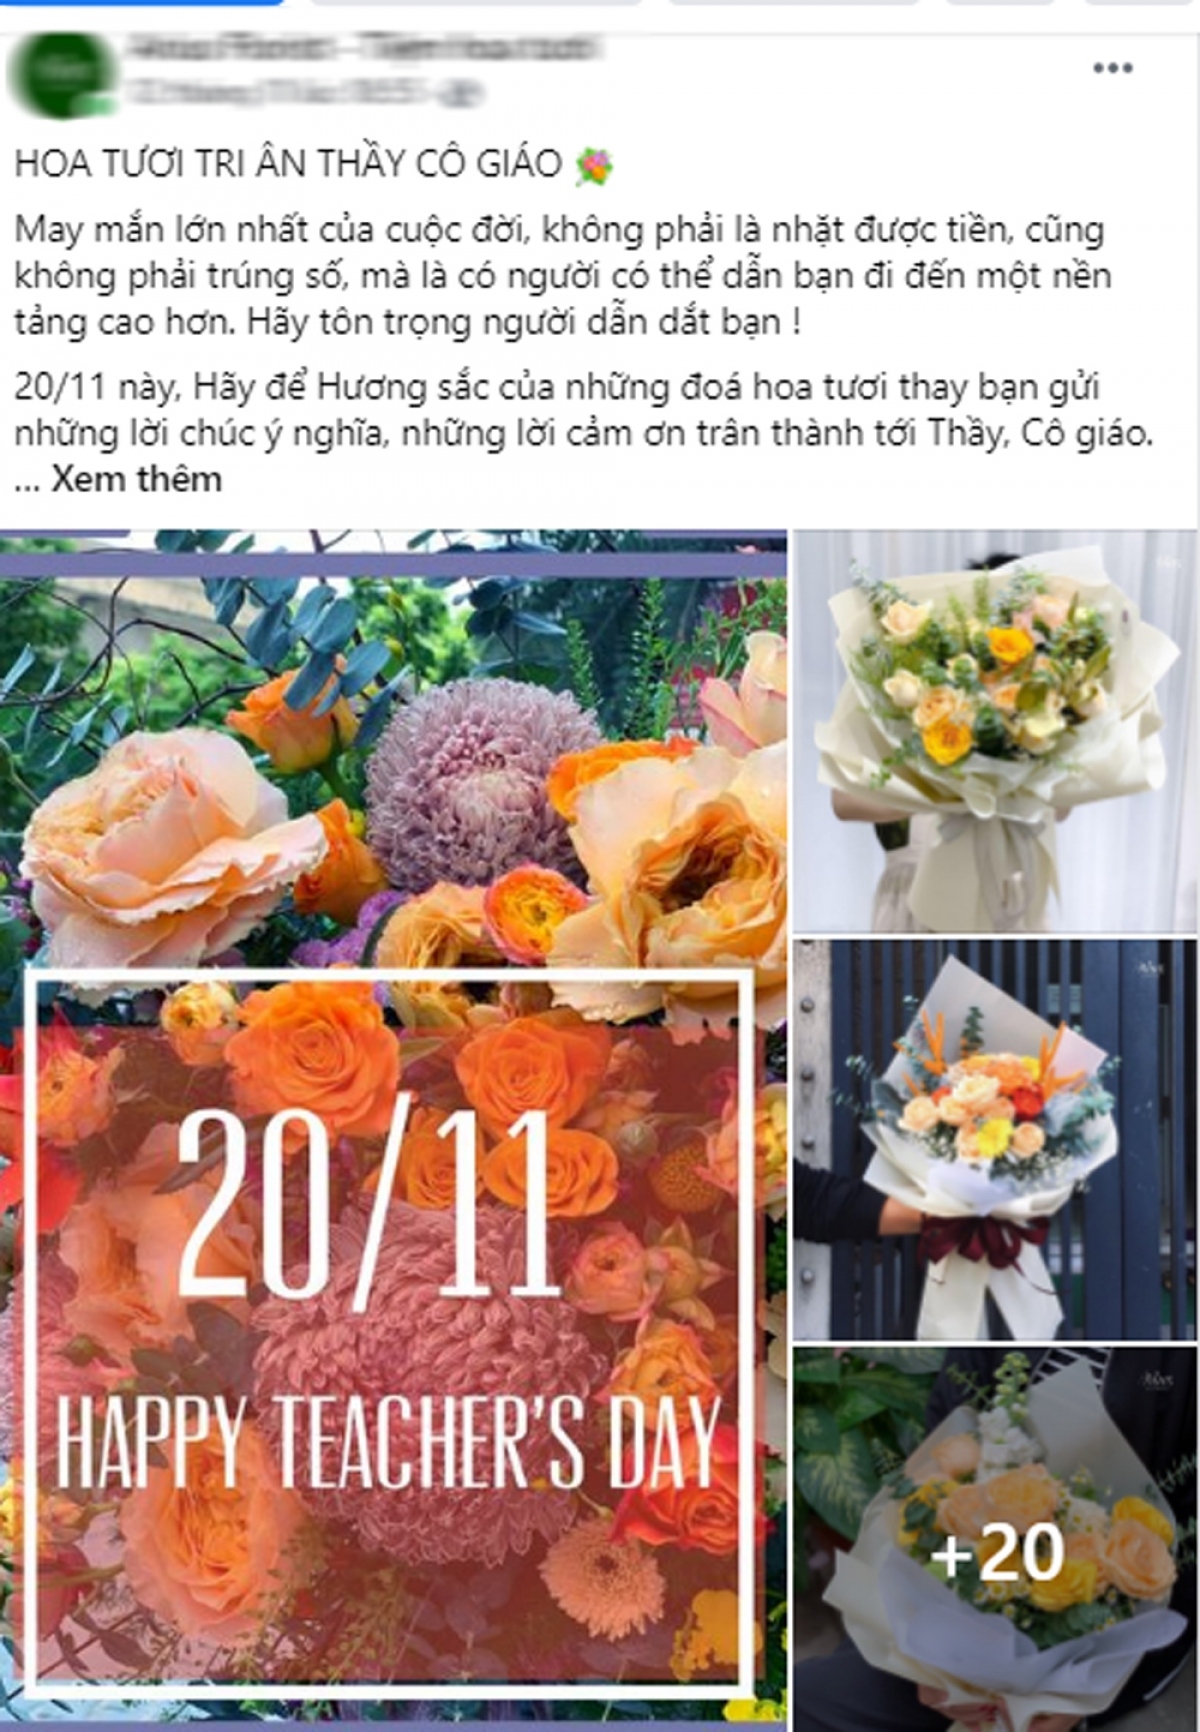 online gift market heats up in anticipation of teachers day picture 2